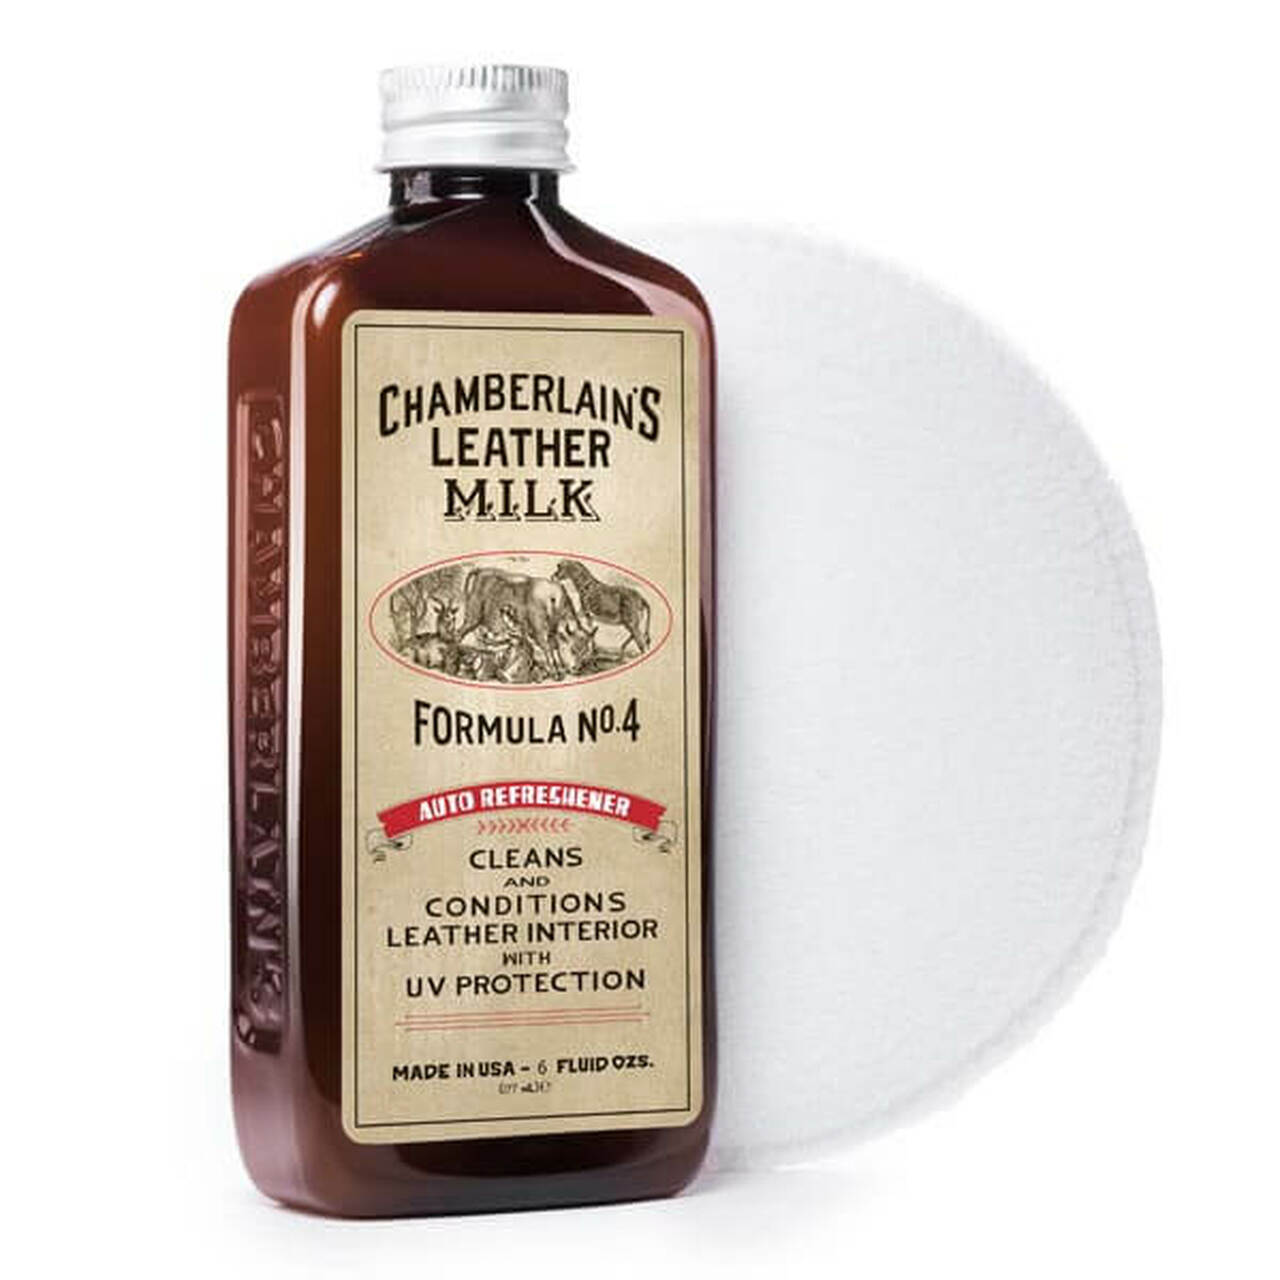 Chamberlain's Auto Refreshener No. 4 - Leather Auto Upholstery Conditioner, Hotchkiss Leather